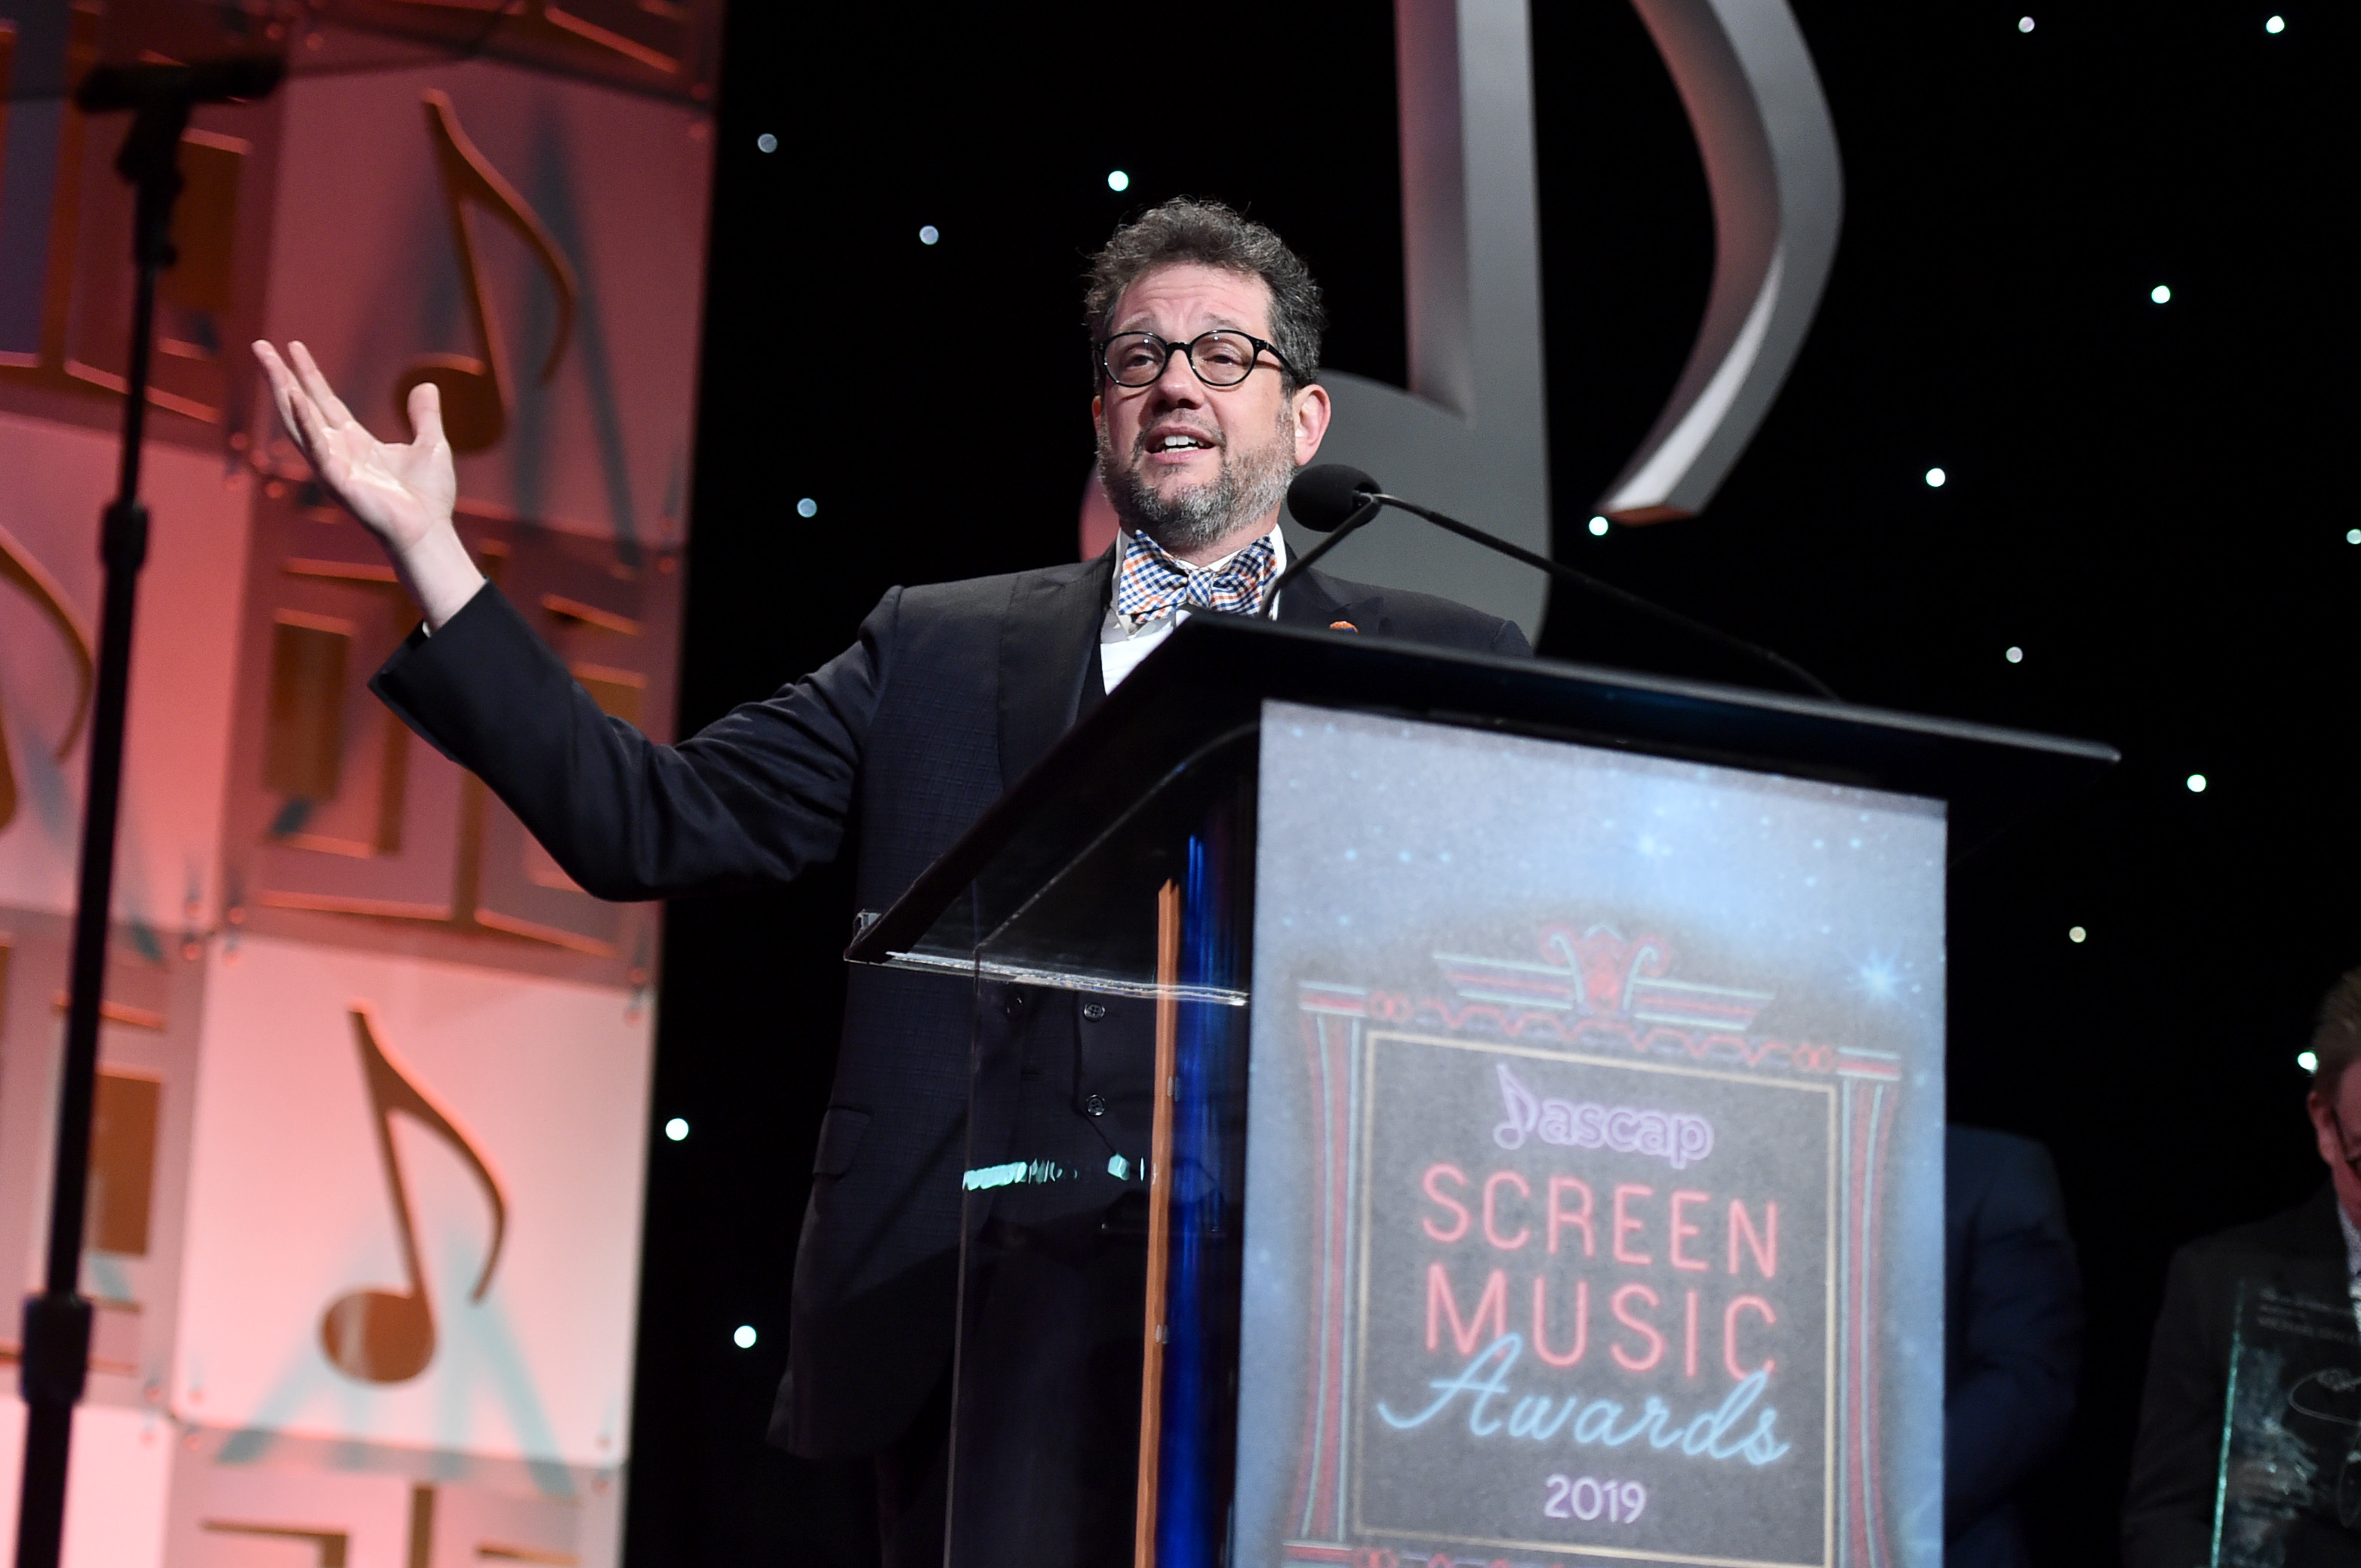 Michael Giacchino speaks onstage during the ASCAP 2019 Screen Music Awards Show